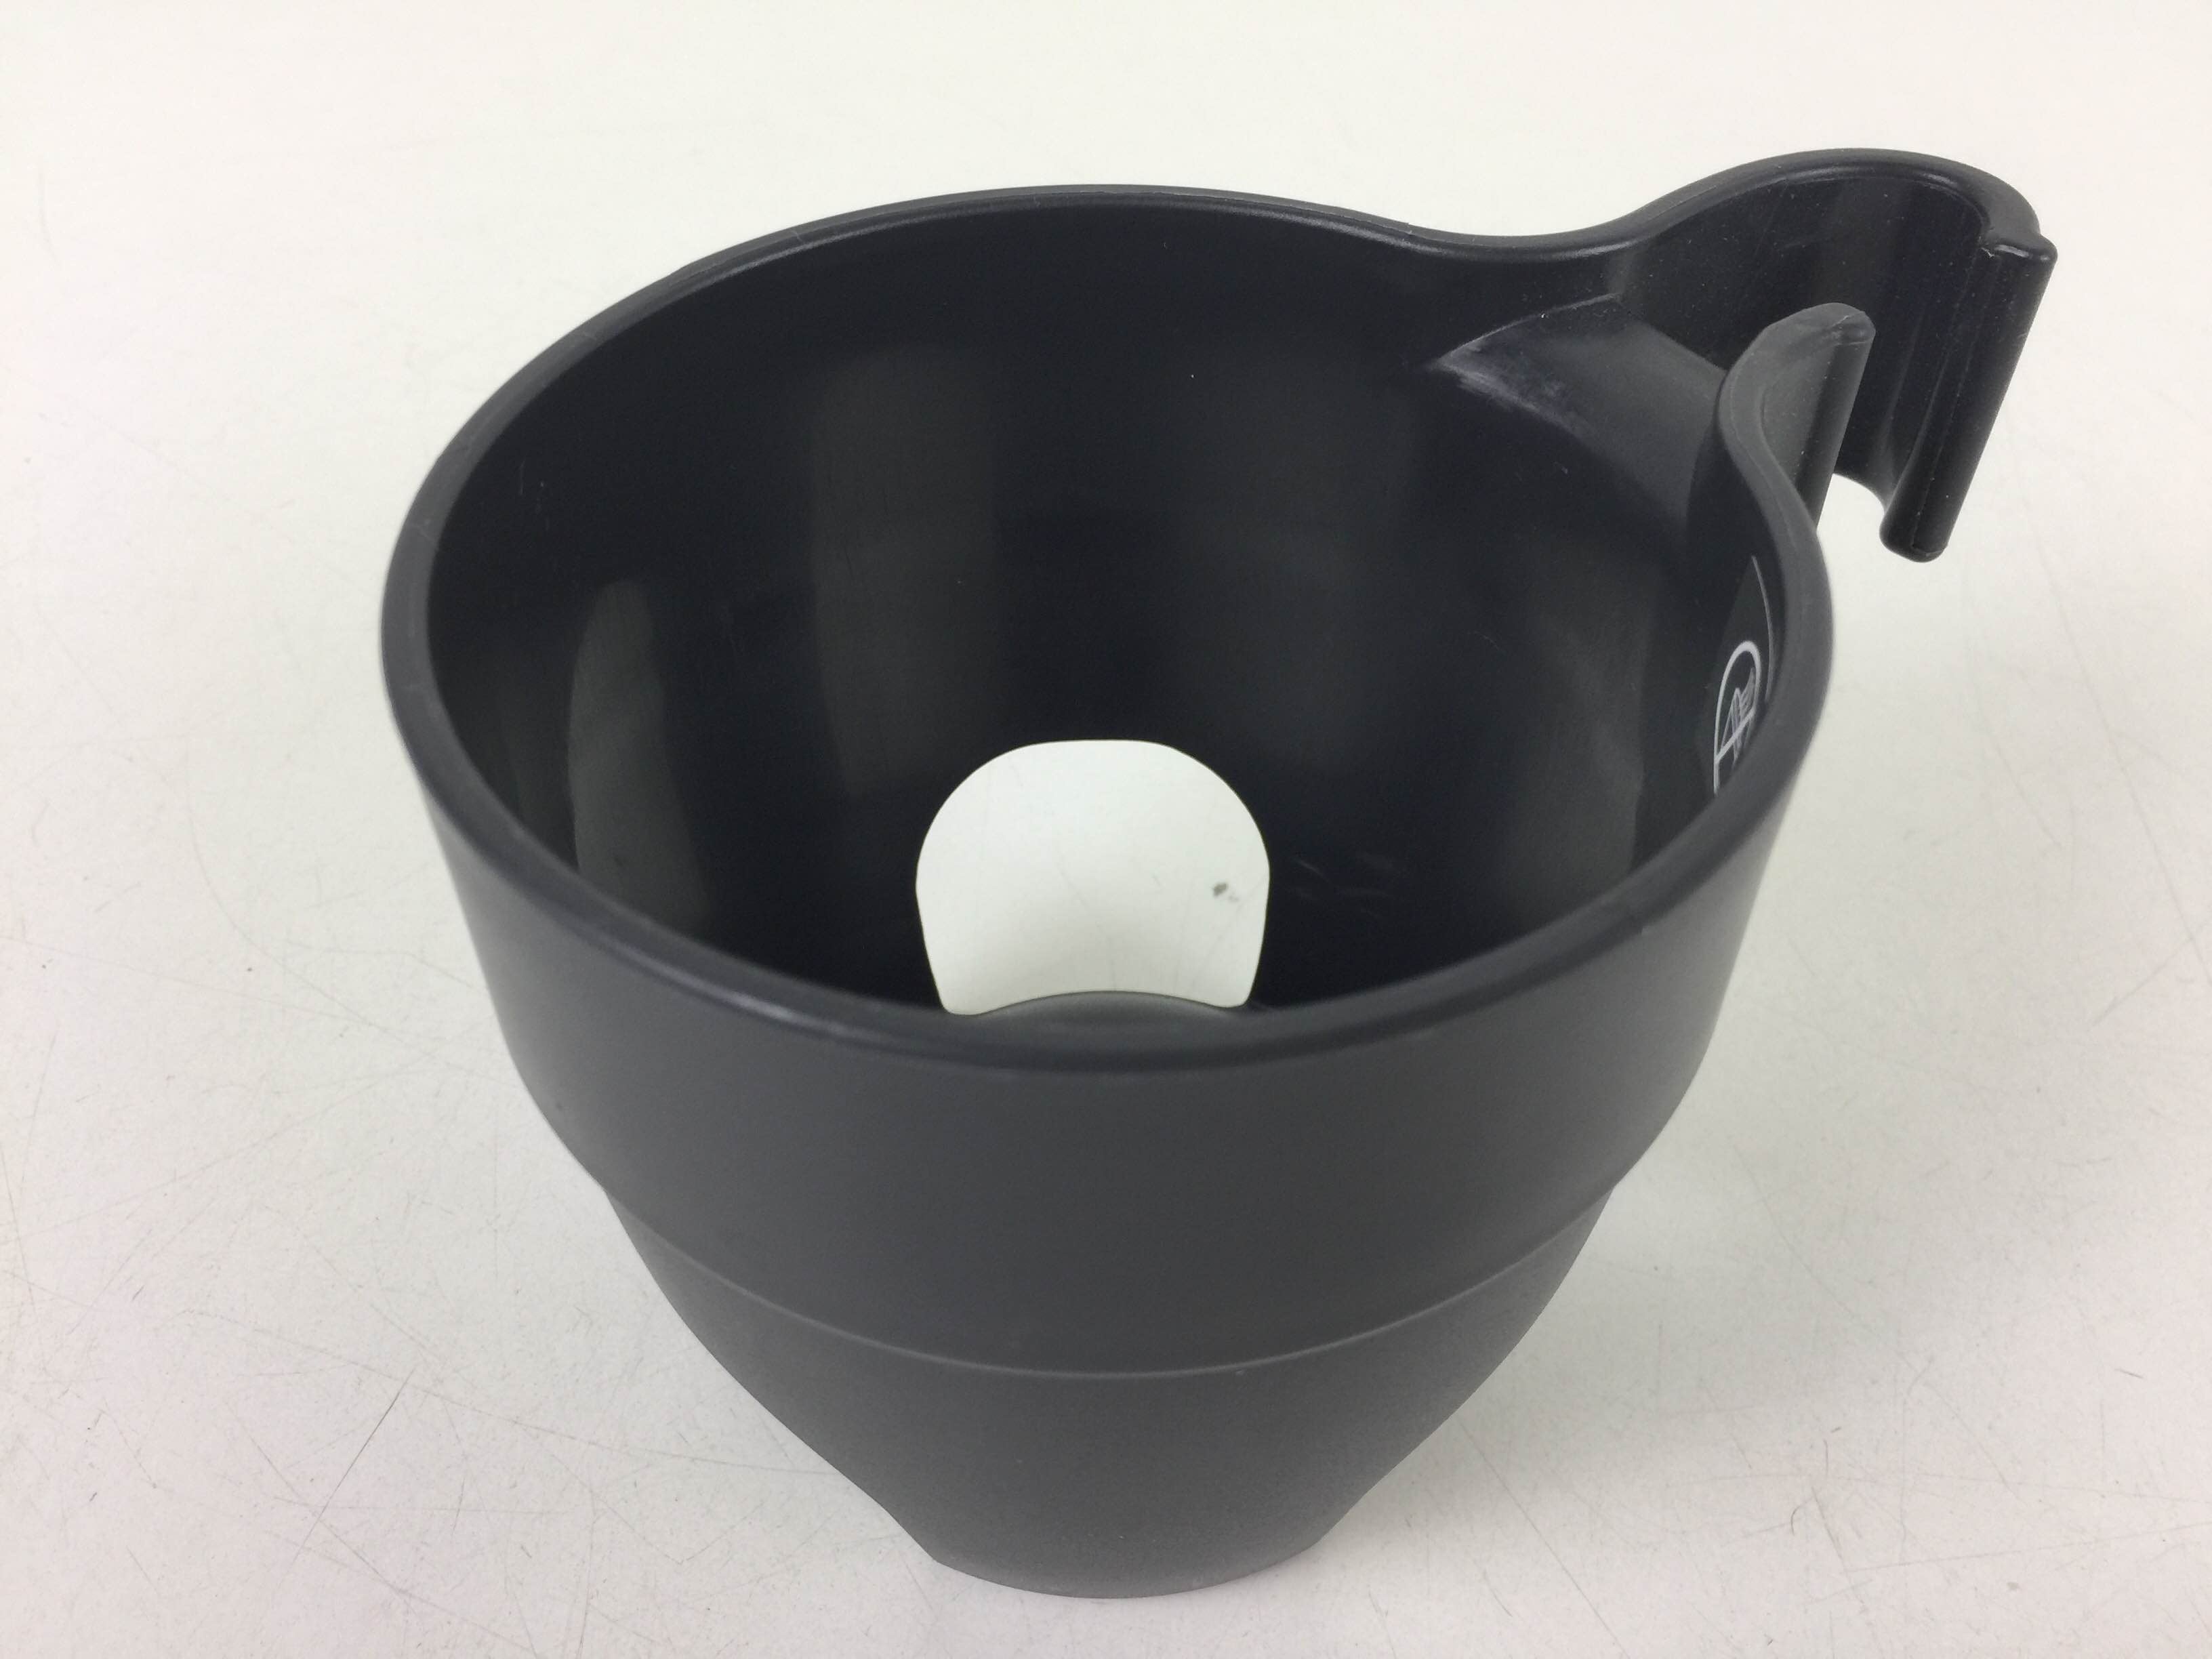 uppababy g luxe cup holder